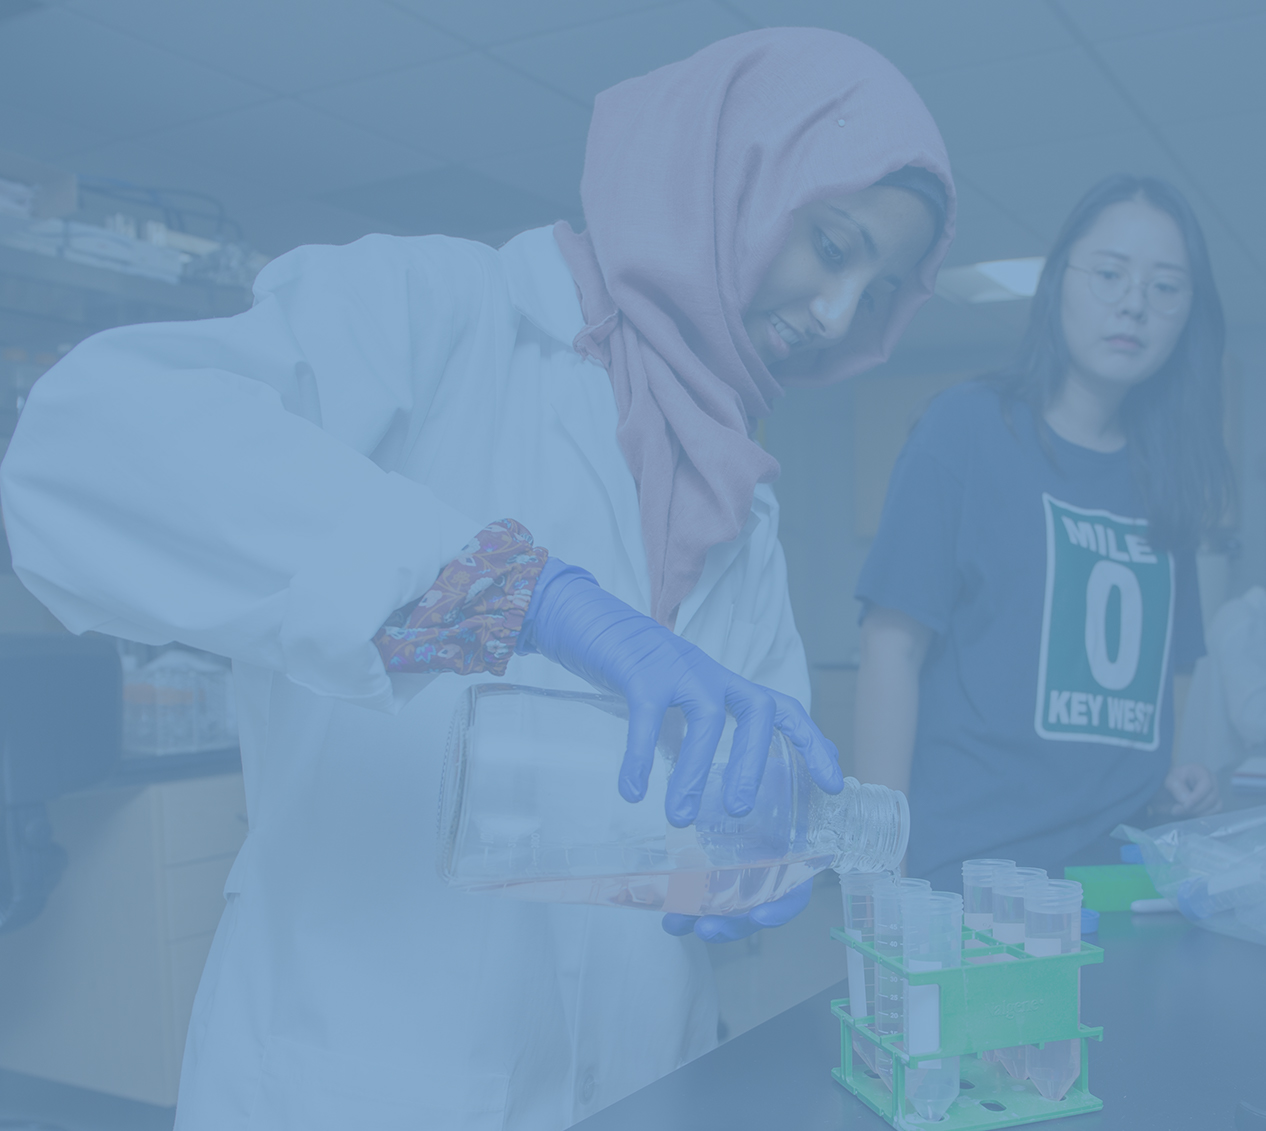 CALS student wearing a white lab coat, gloves and a headscarf pours a solution into graduated cylinders while her teacher observes.  